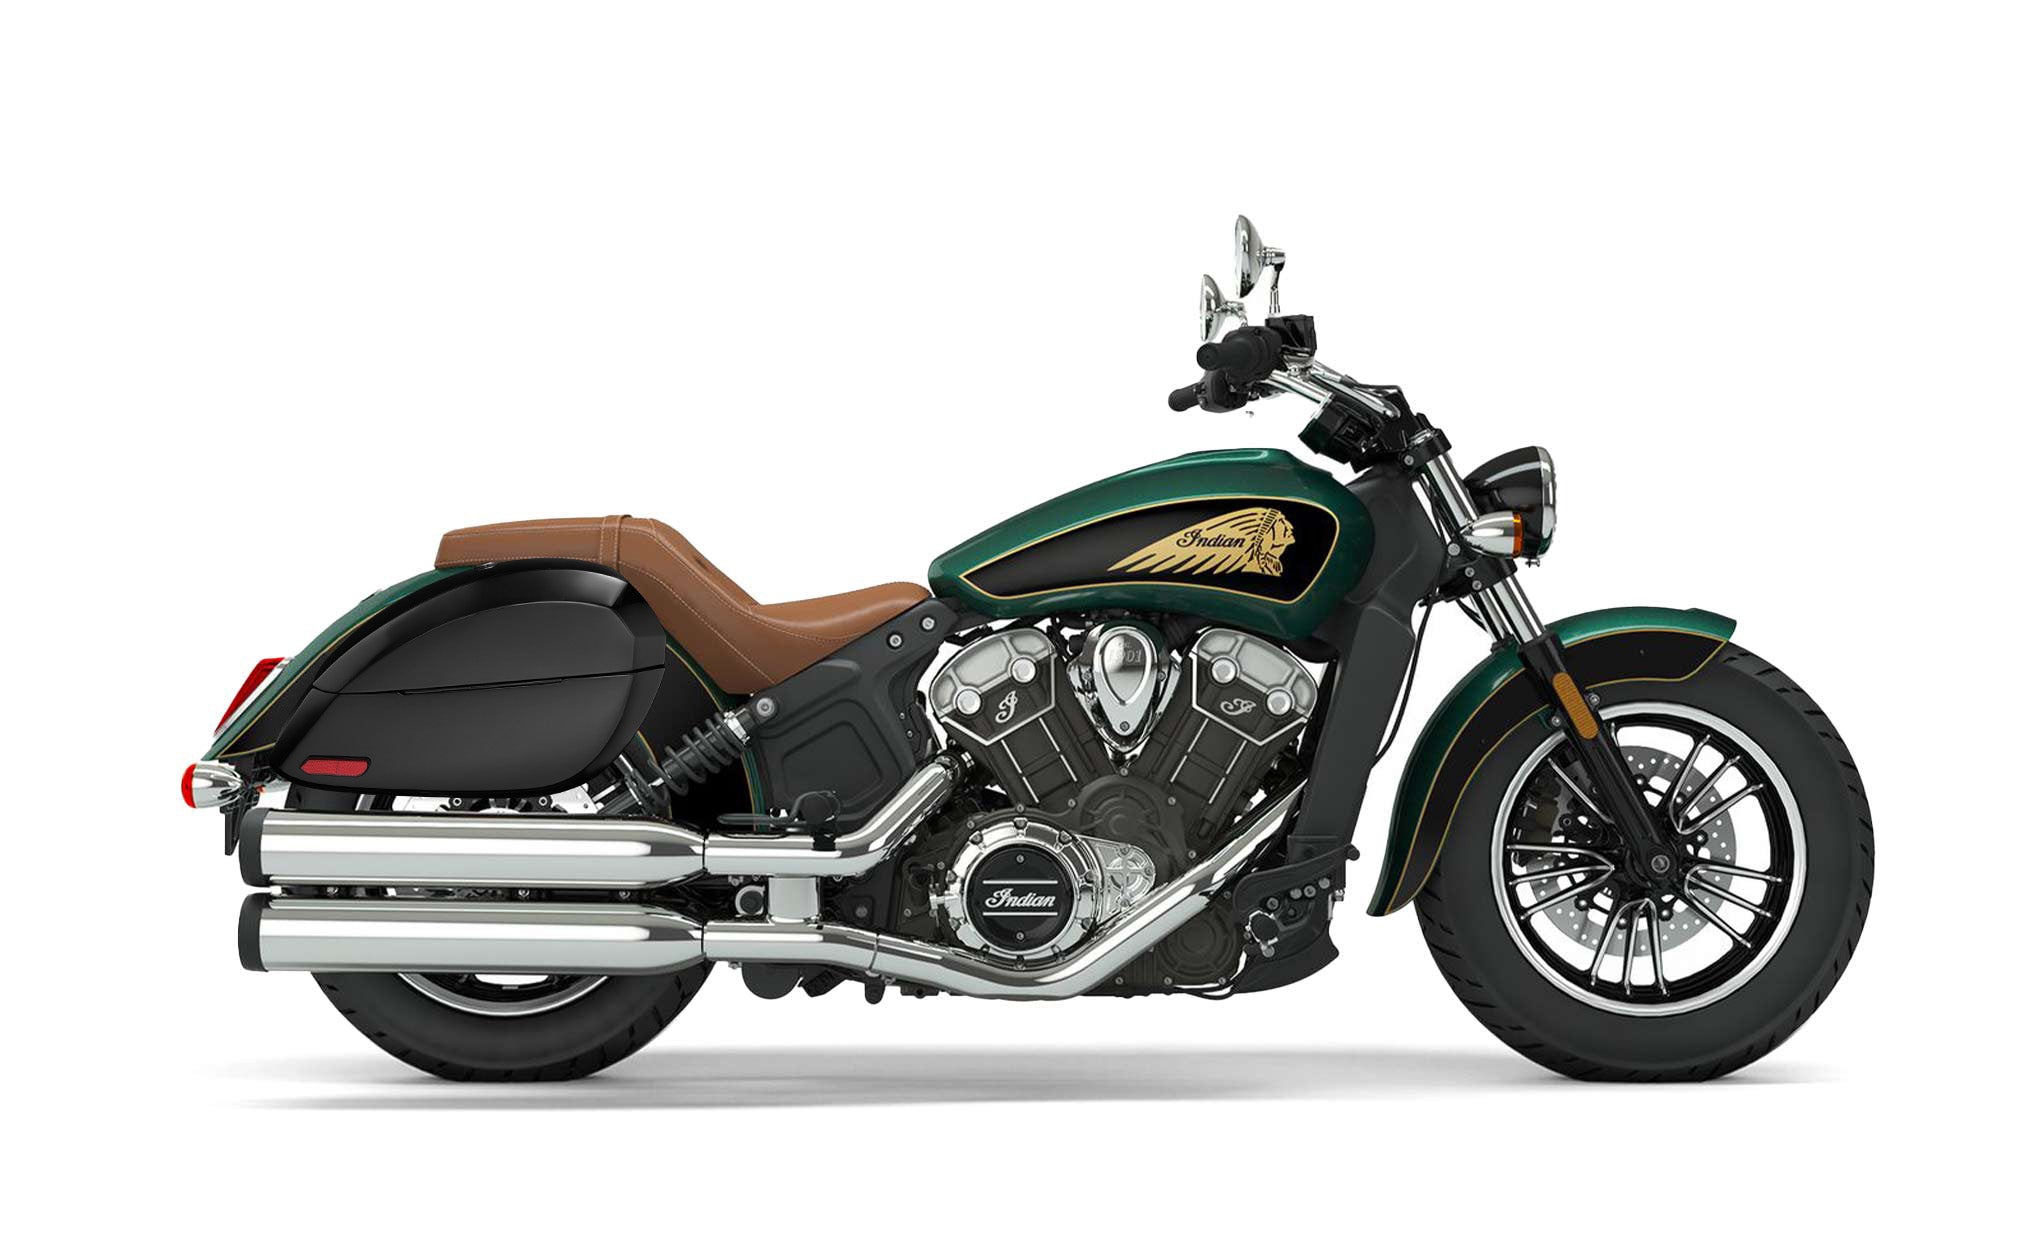 Viking Phantom Large Indian Scout Painted Motorcycle Hard Saddlebags Engineering Excellence with Bag on Bike @expand